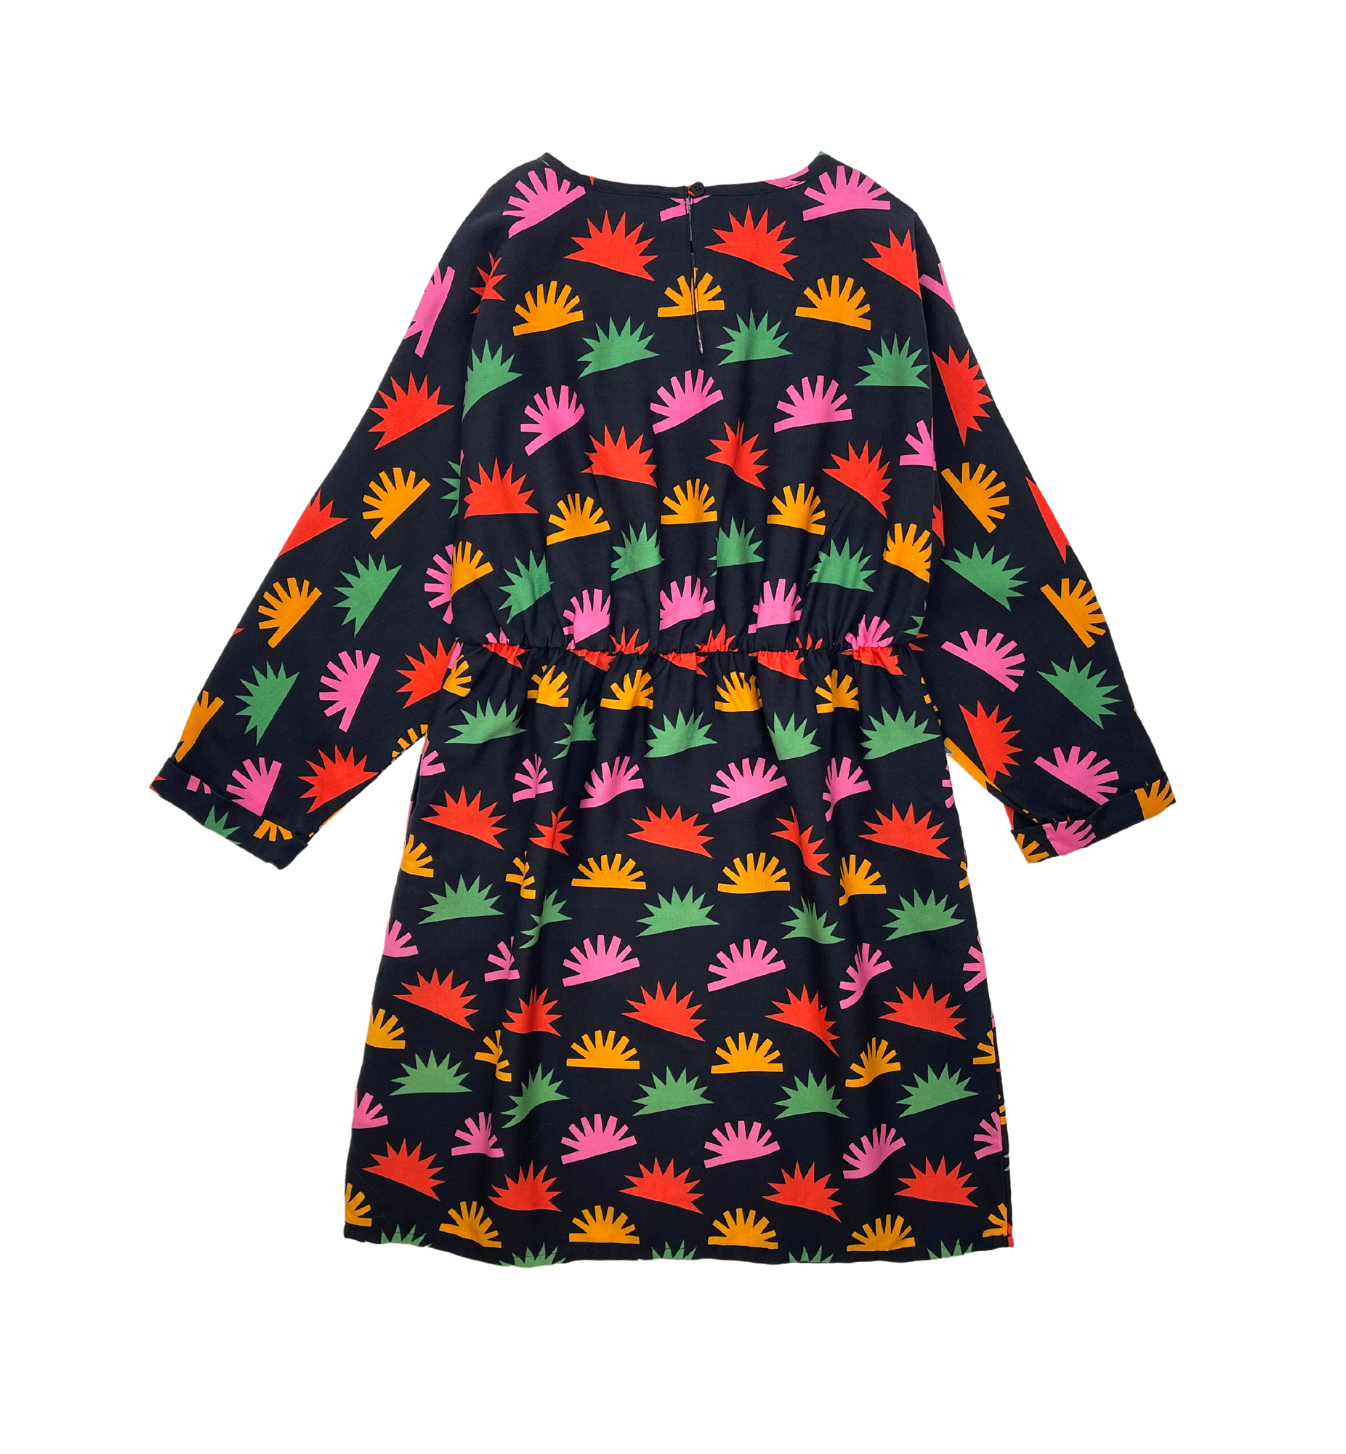 STELLA MCCARTNEY - Black dress with multicolor patterns - 8 years old